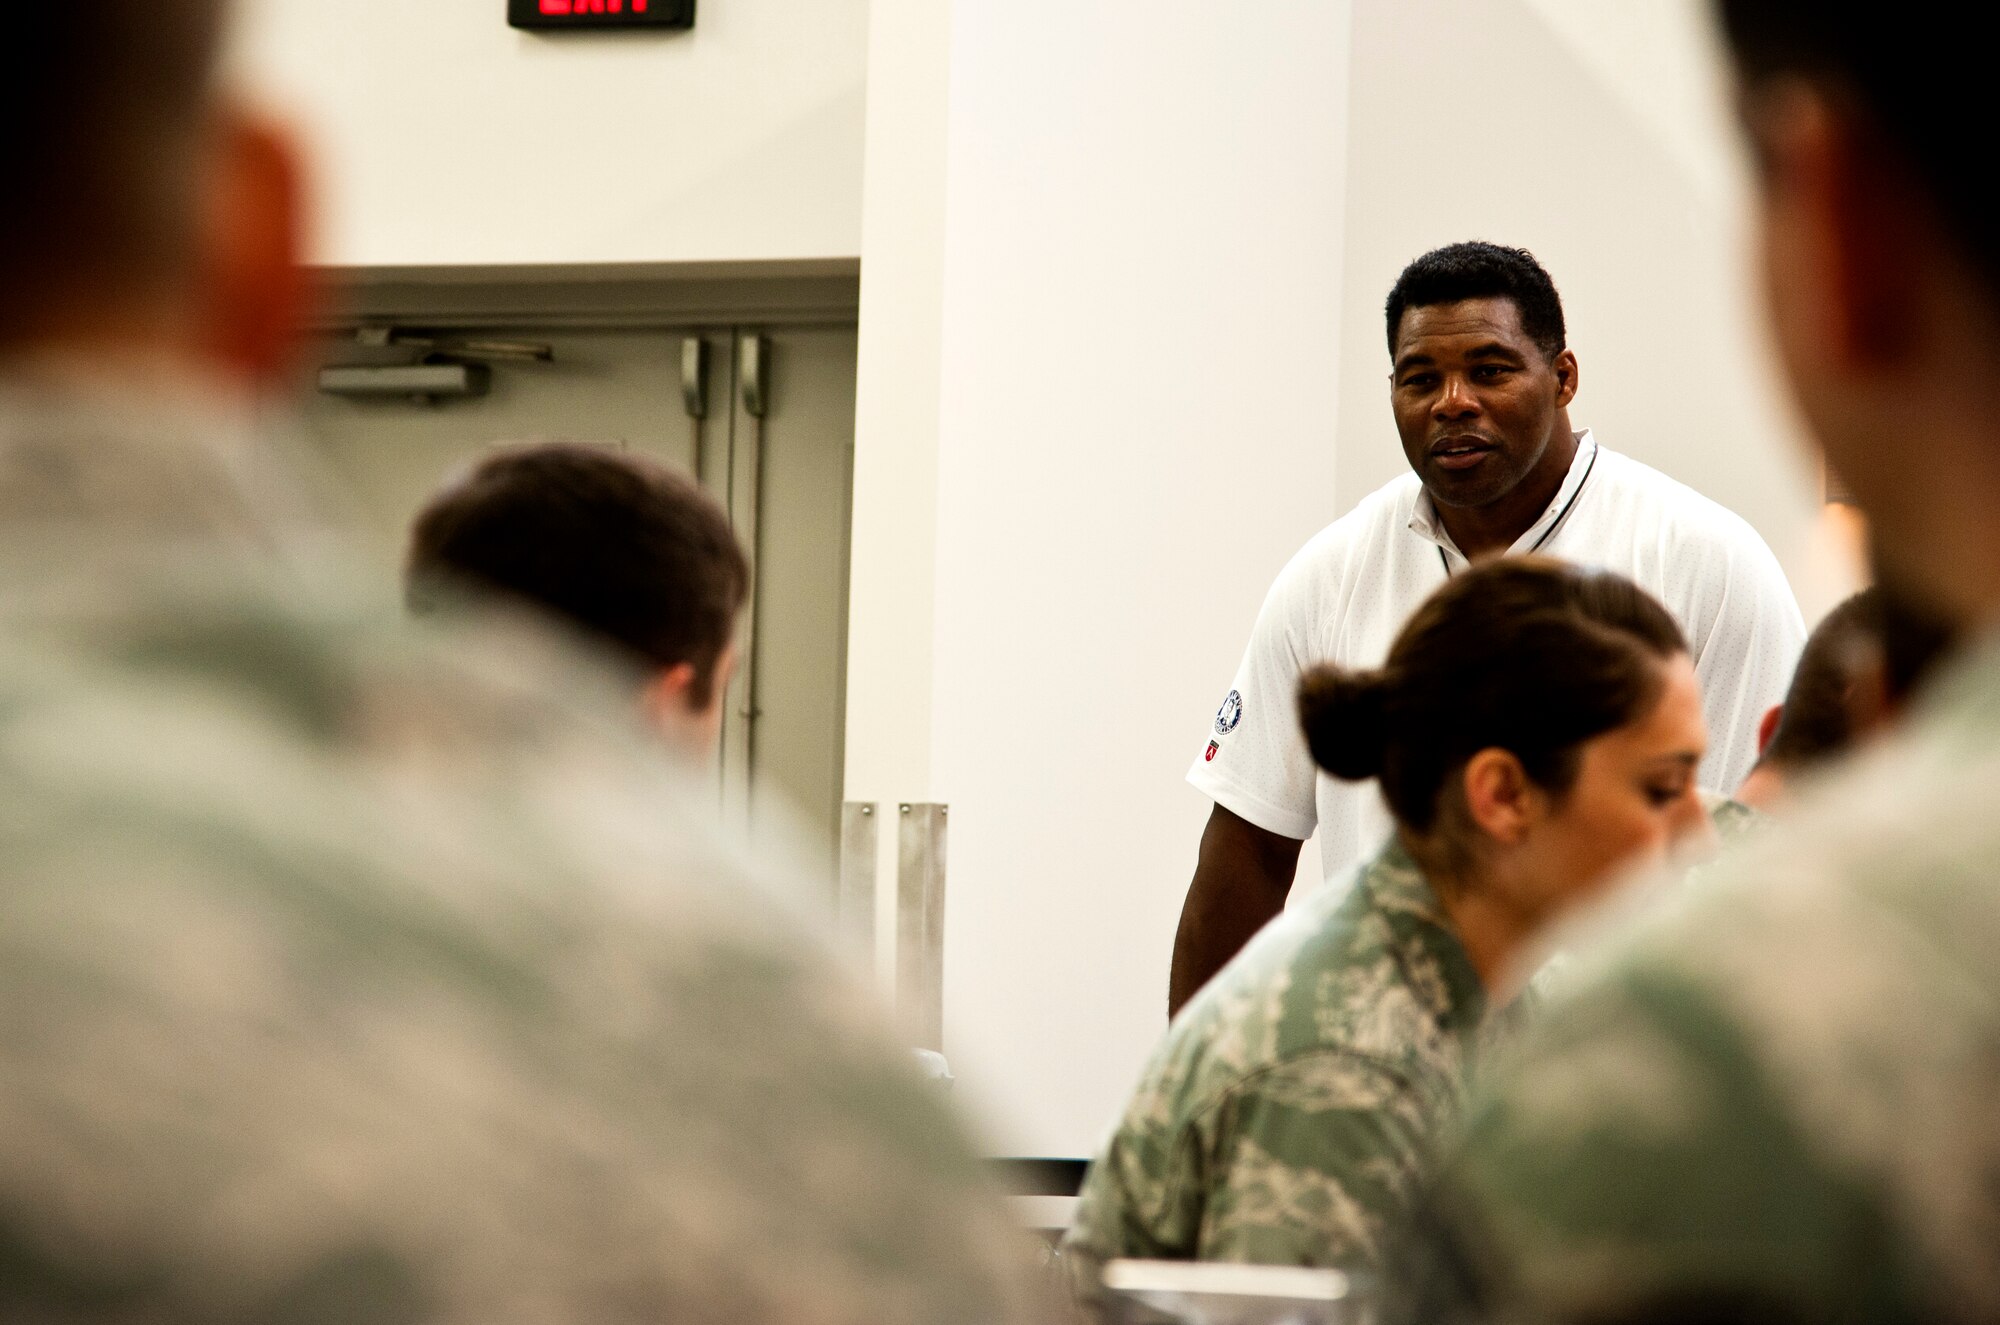 Herschel Walker responds to a question about his football career during a breakfast May 21, 2014, at Whiteman Air Force Base, Missouri. Walker is a three-time All-American and winner of the 1982 Heisman Trophy. (U.S. Air Force photo by Senior Airman Daniel Phelps/Released)